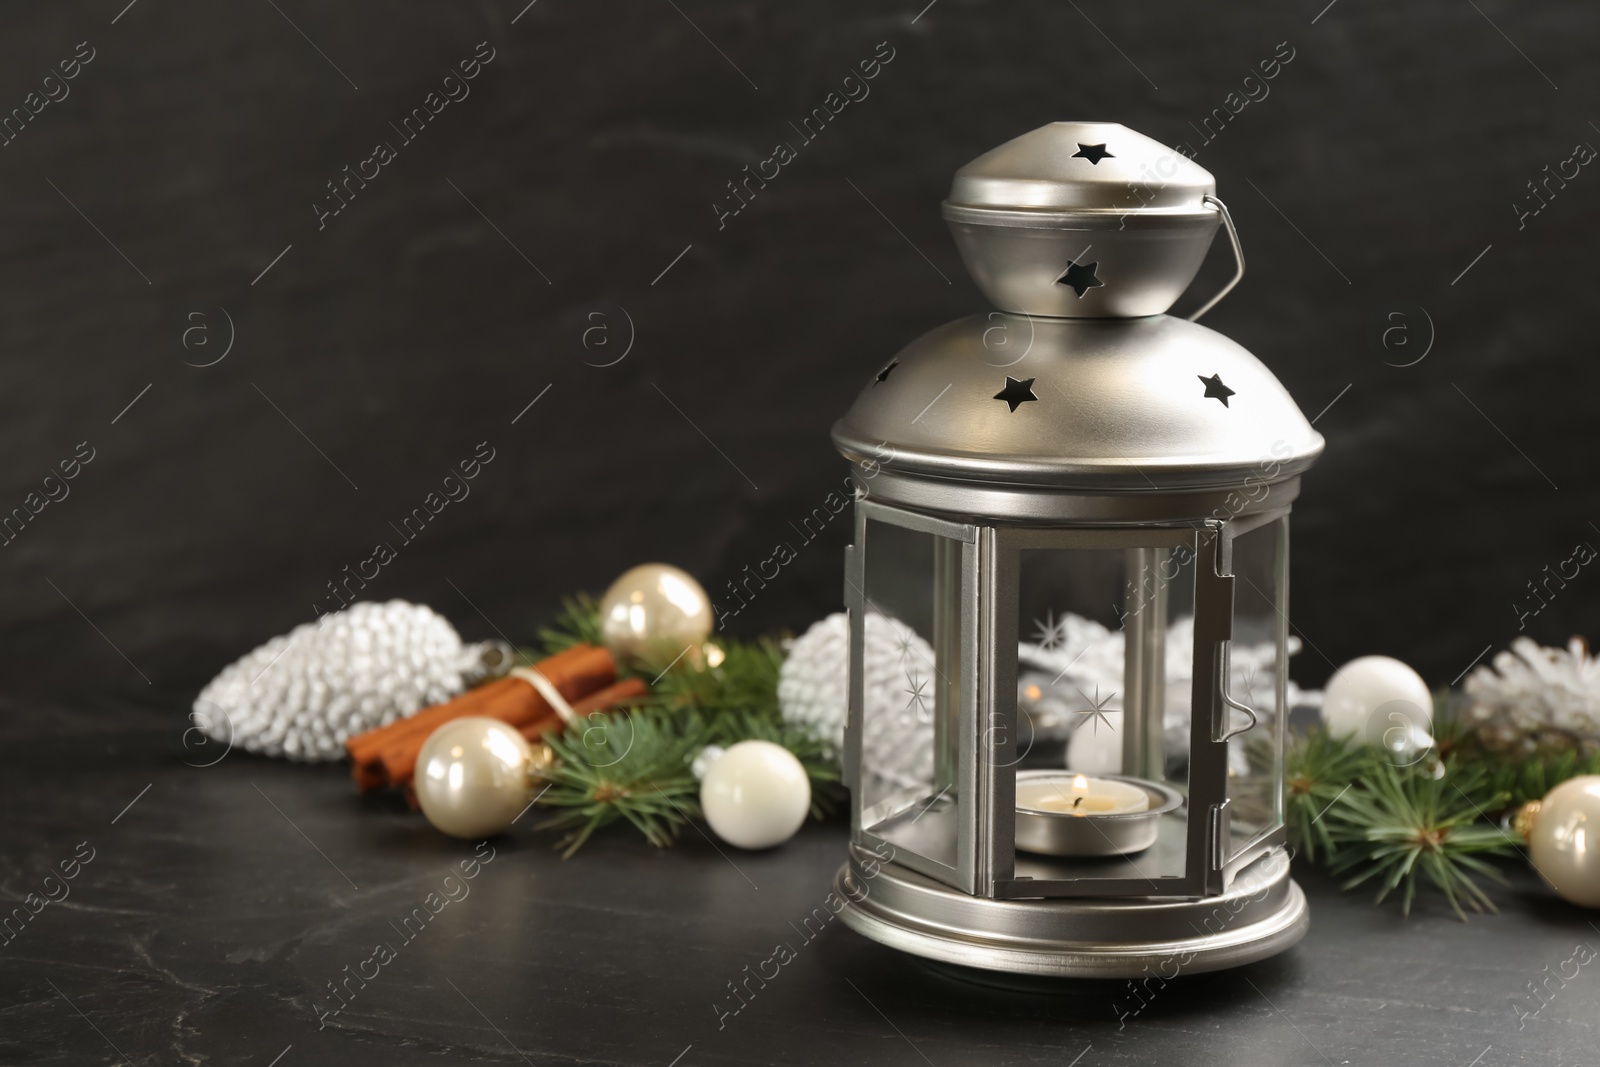 Photo of Christmas lantern with burning candle and festive decor on black table. Space for text